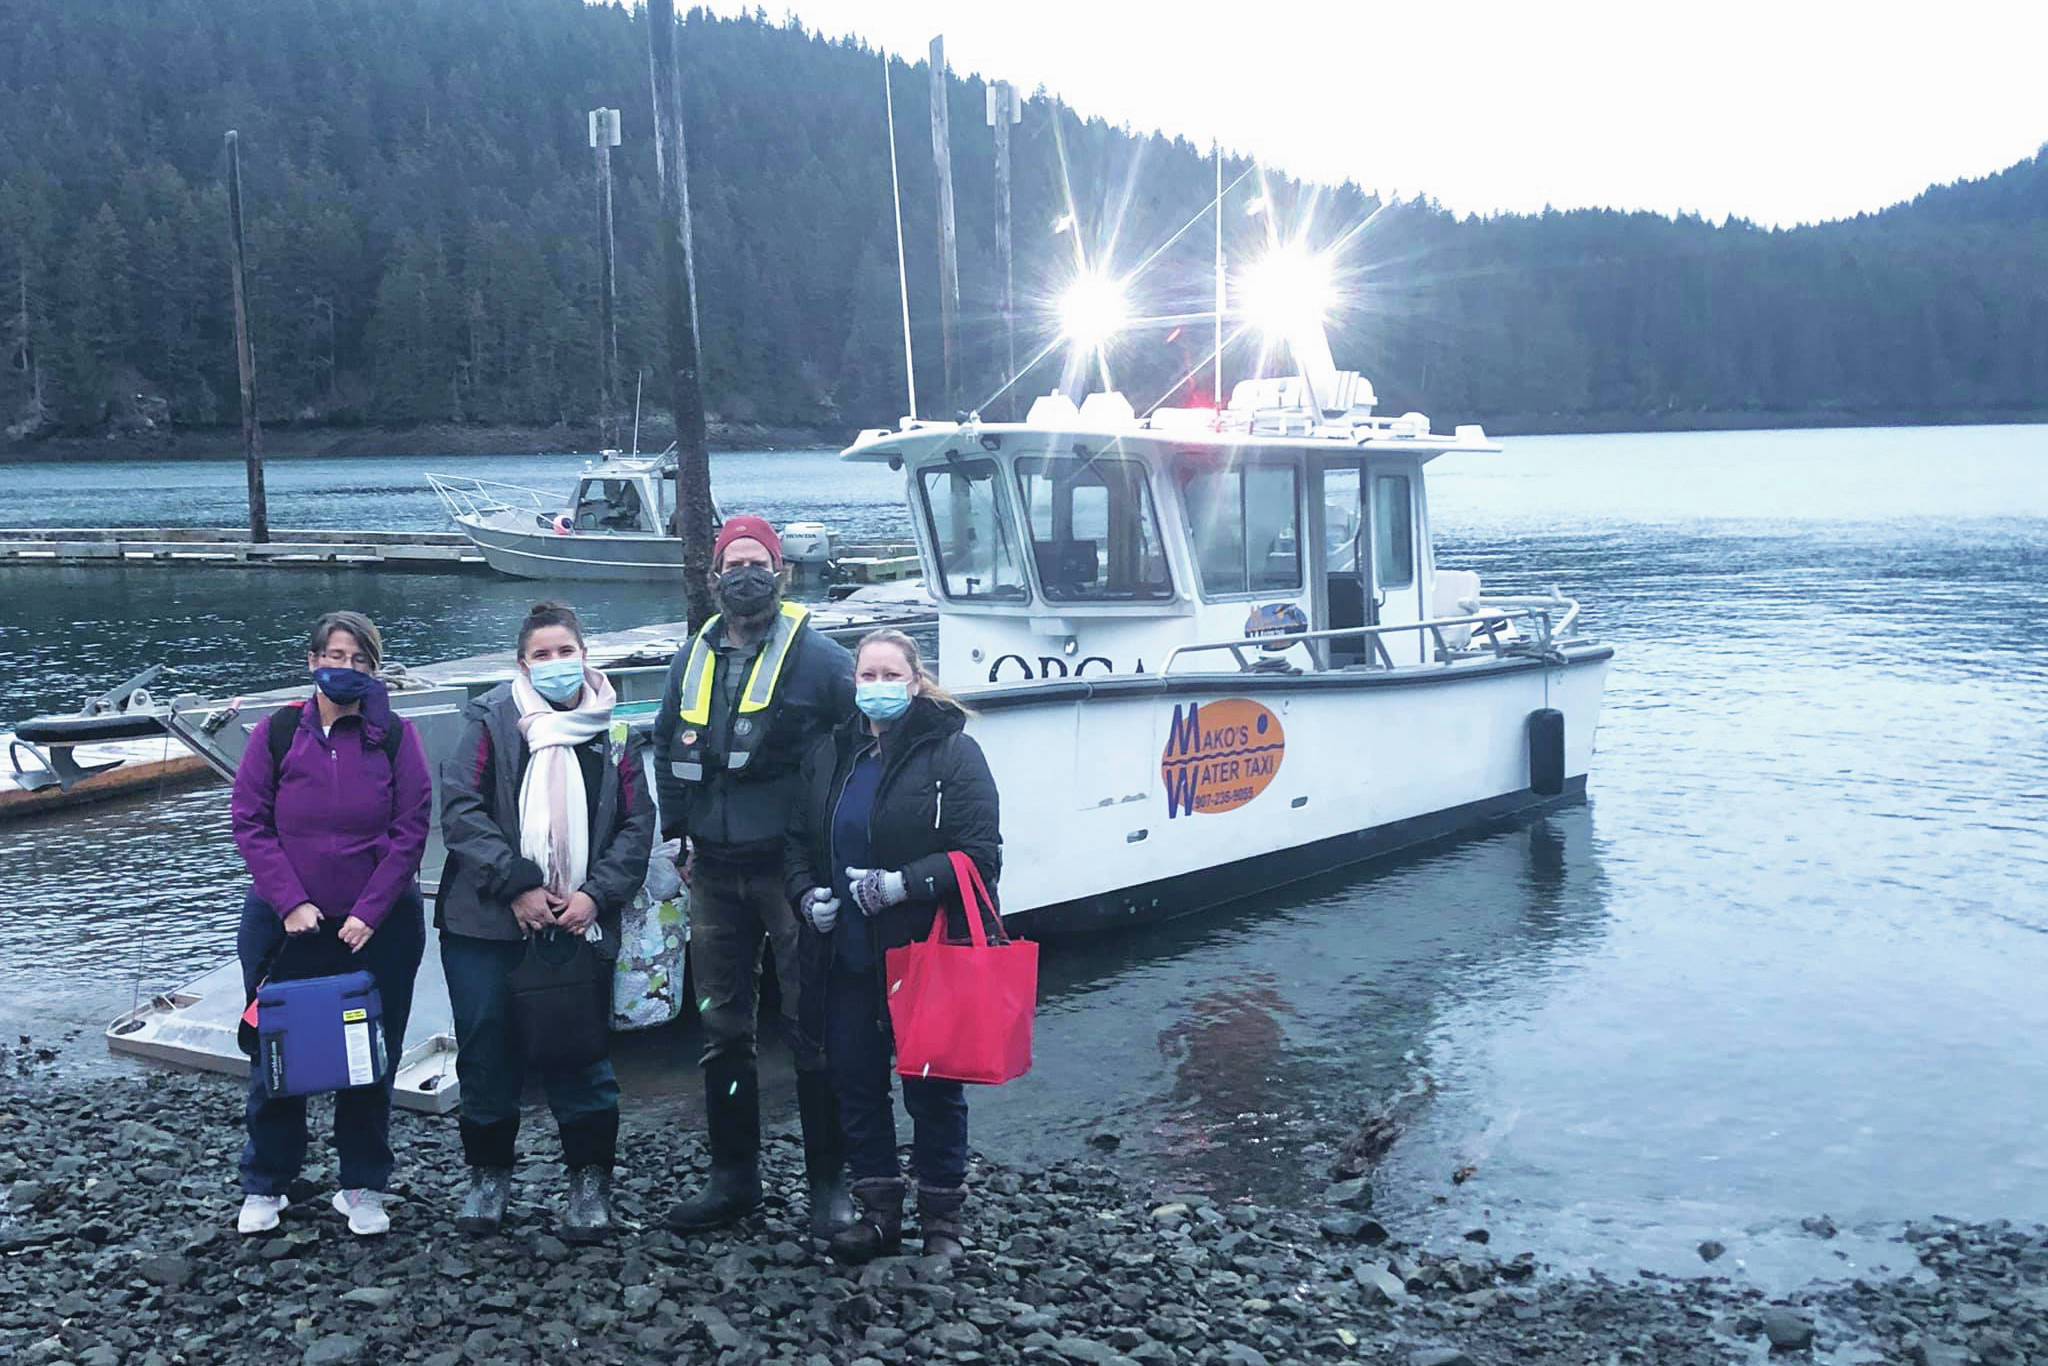 Curtis Jackson, second from right, poses on Thursday, Dec. 17, 2020, with SVT Health & Wellness Center health care workers in Jakolof Bay, Alaska, after making a trip across Kachemak Bay from Homer to deliver the medical team and Pfizer COVID-19 vaccine. From left to right are nurse Candice Kreger, family nurse practitioner Kourtney Holder, Jackson, and family nurse practitioner Julie Drude. The health care workers then went by road to Seldovia. (Photo by Janel Harris courtesy of Mako’s Water Taxi)